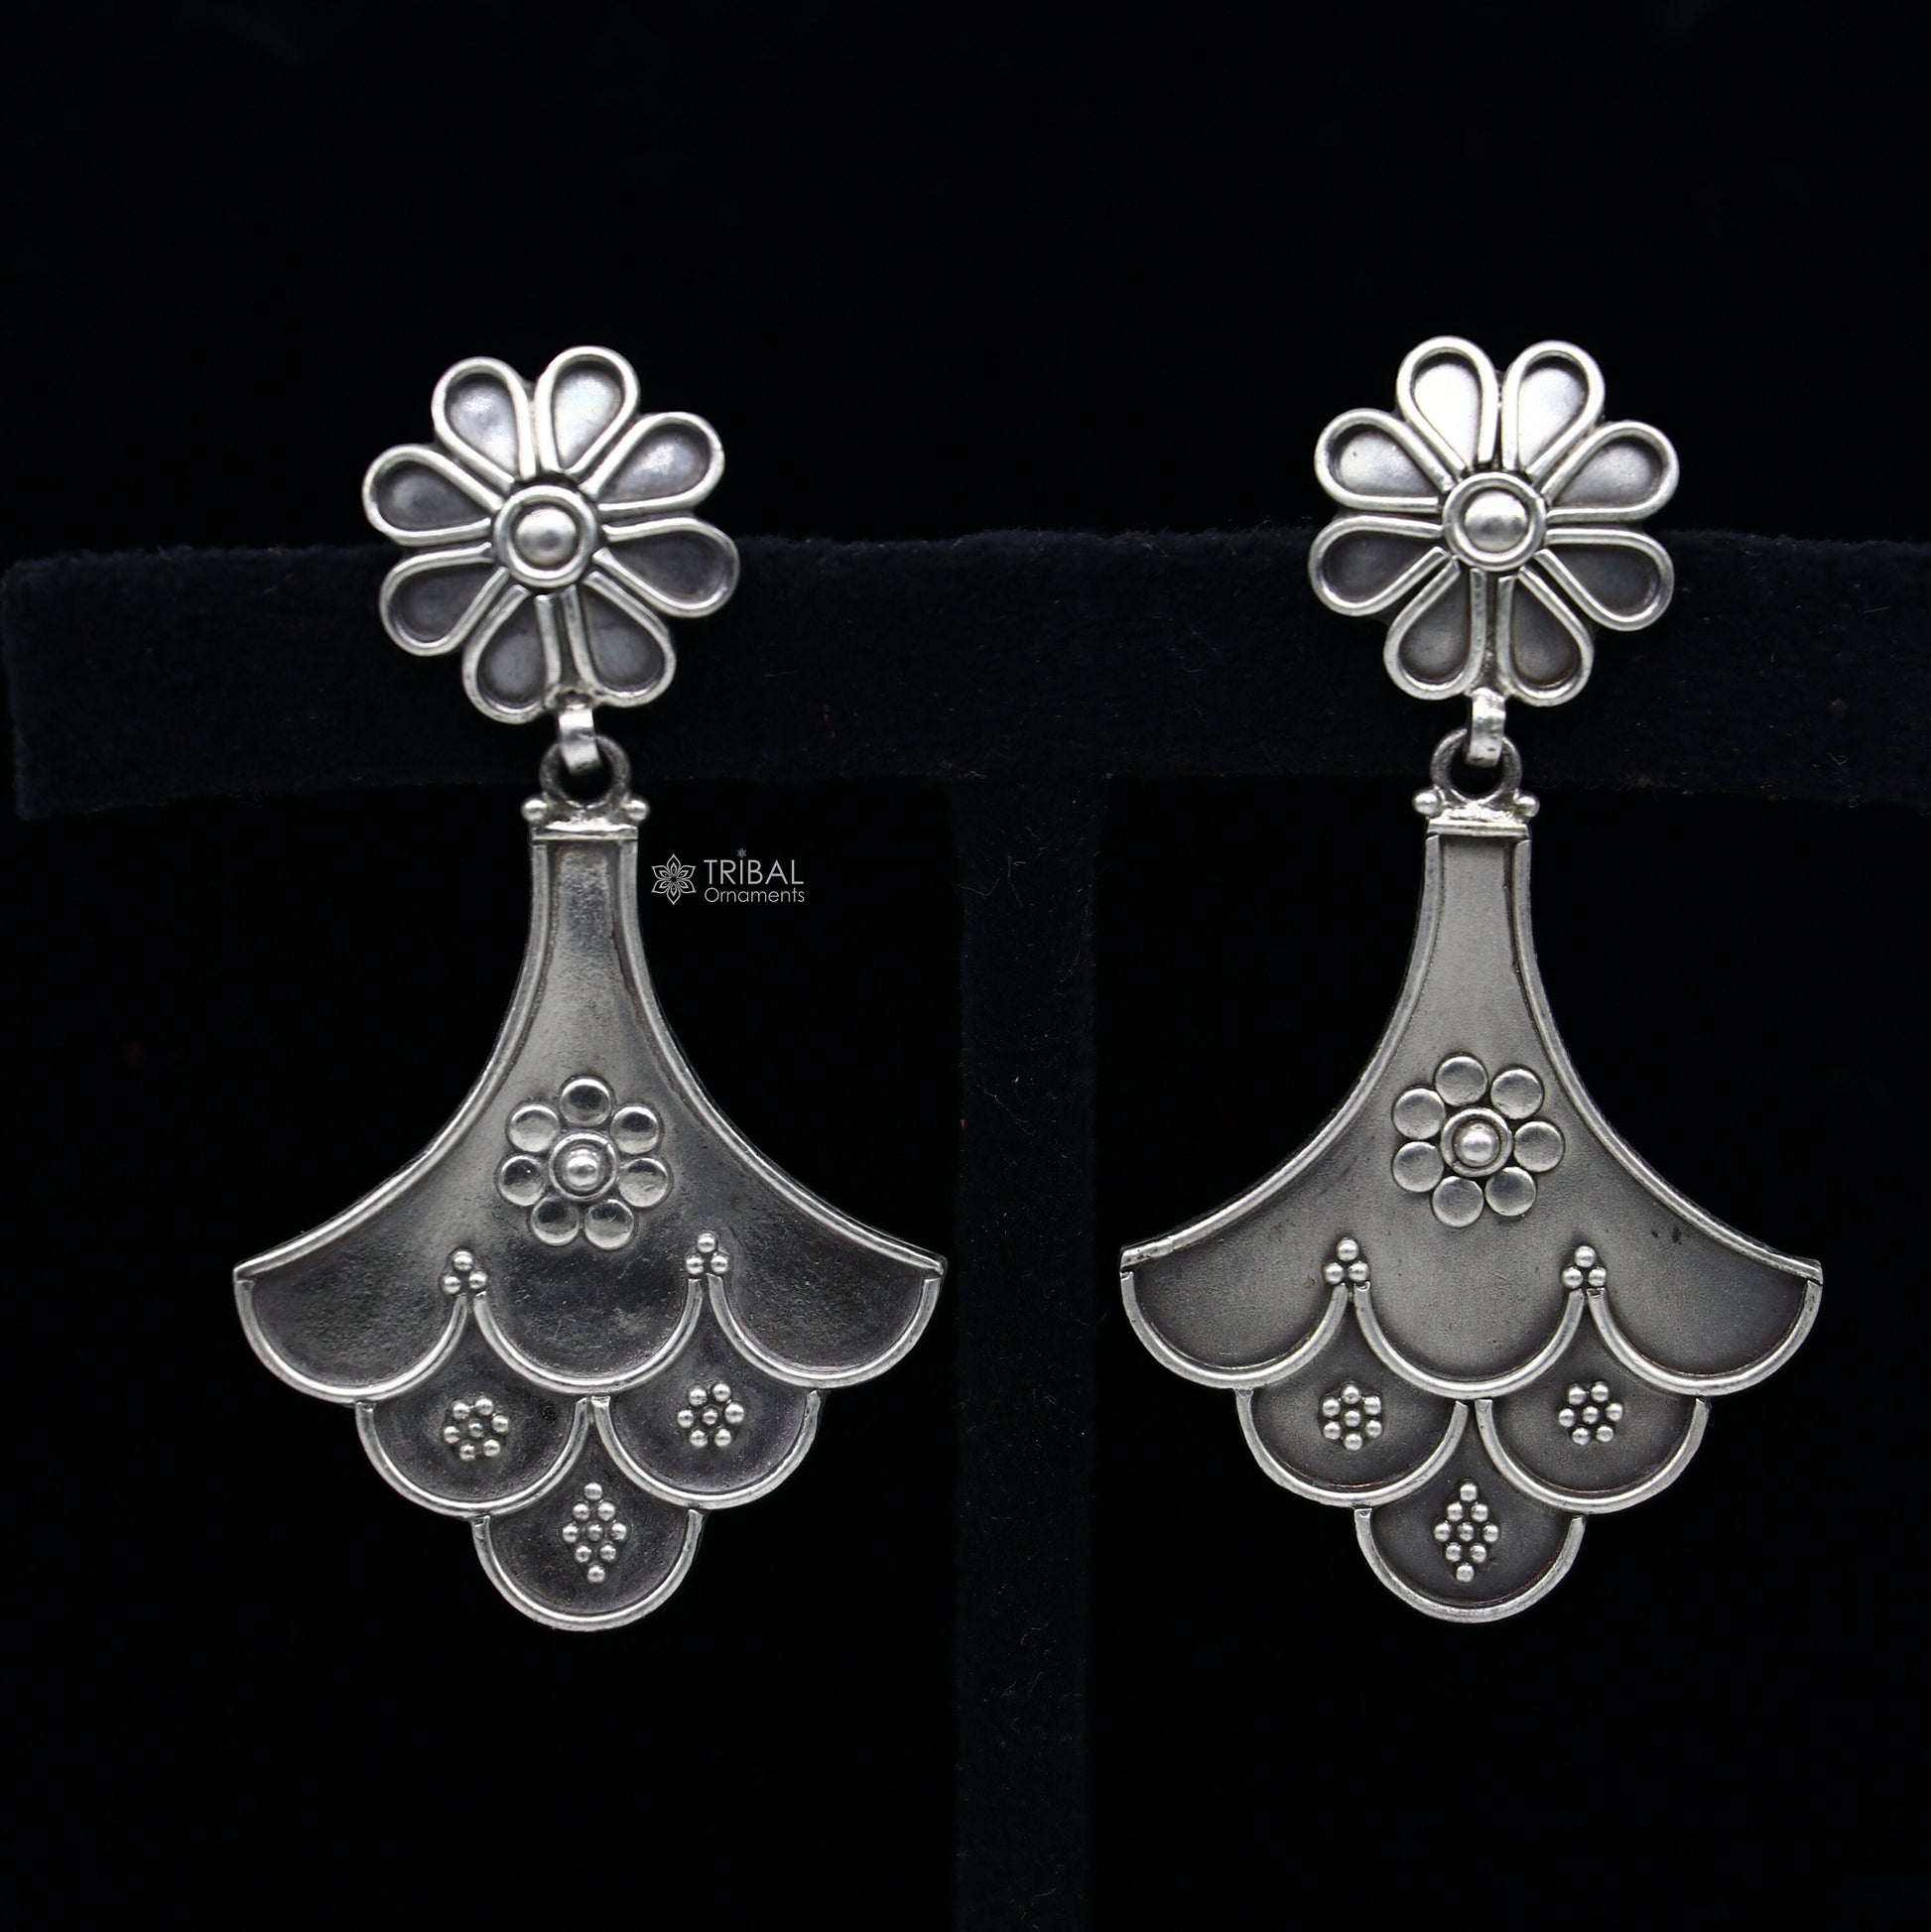 925 Sterling silver handmade traditional cultural design drop dangler fancy earrings, best party functional Navratri jewelry s1237 - TRIBAL ORNAMENTS